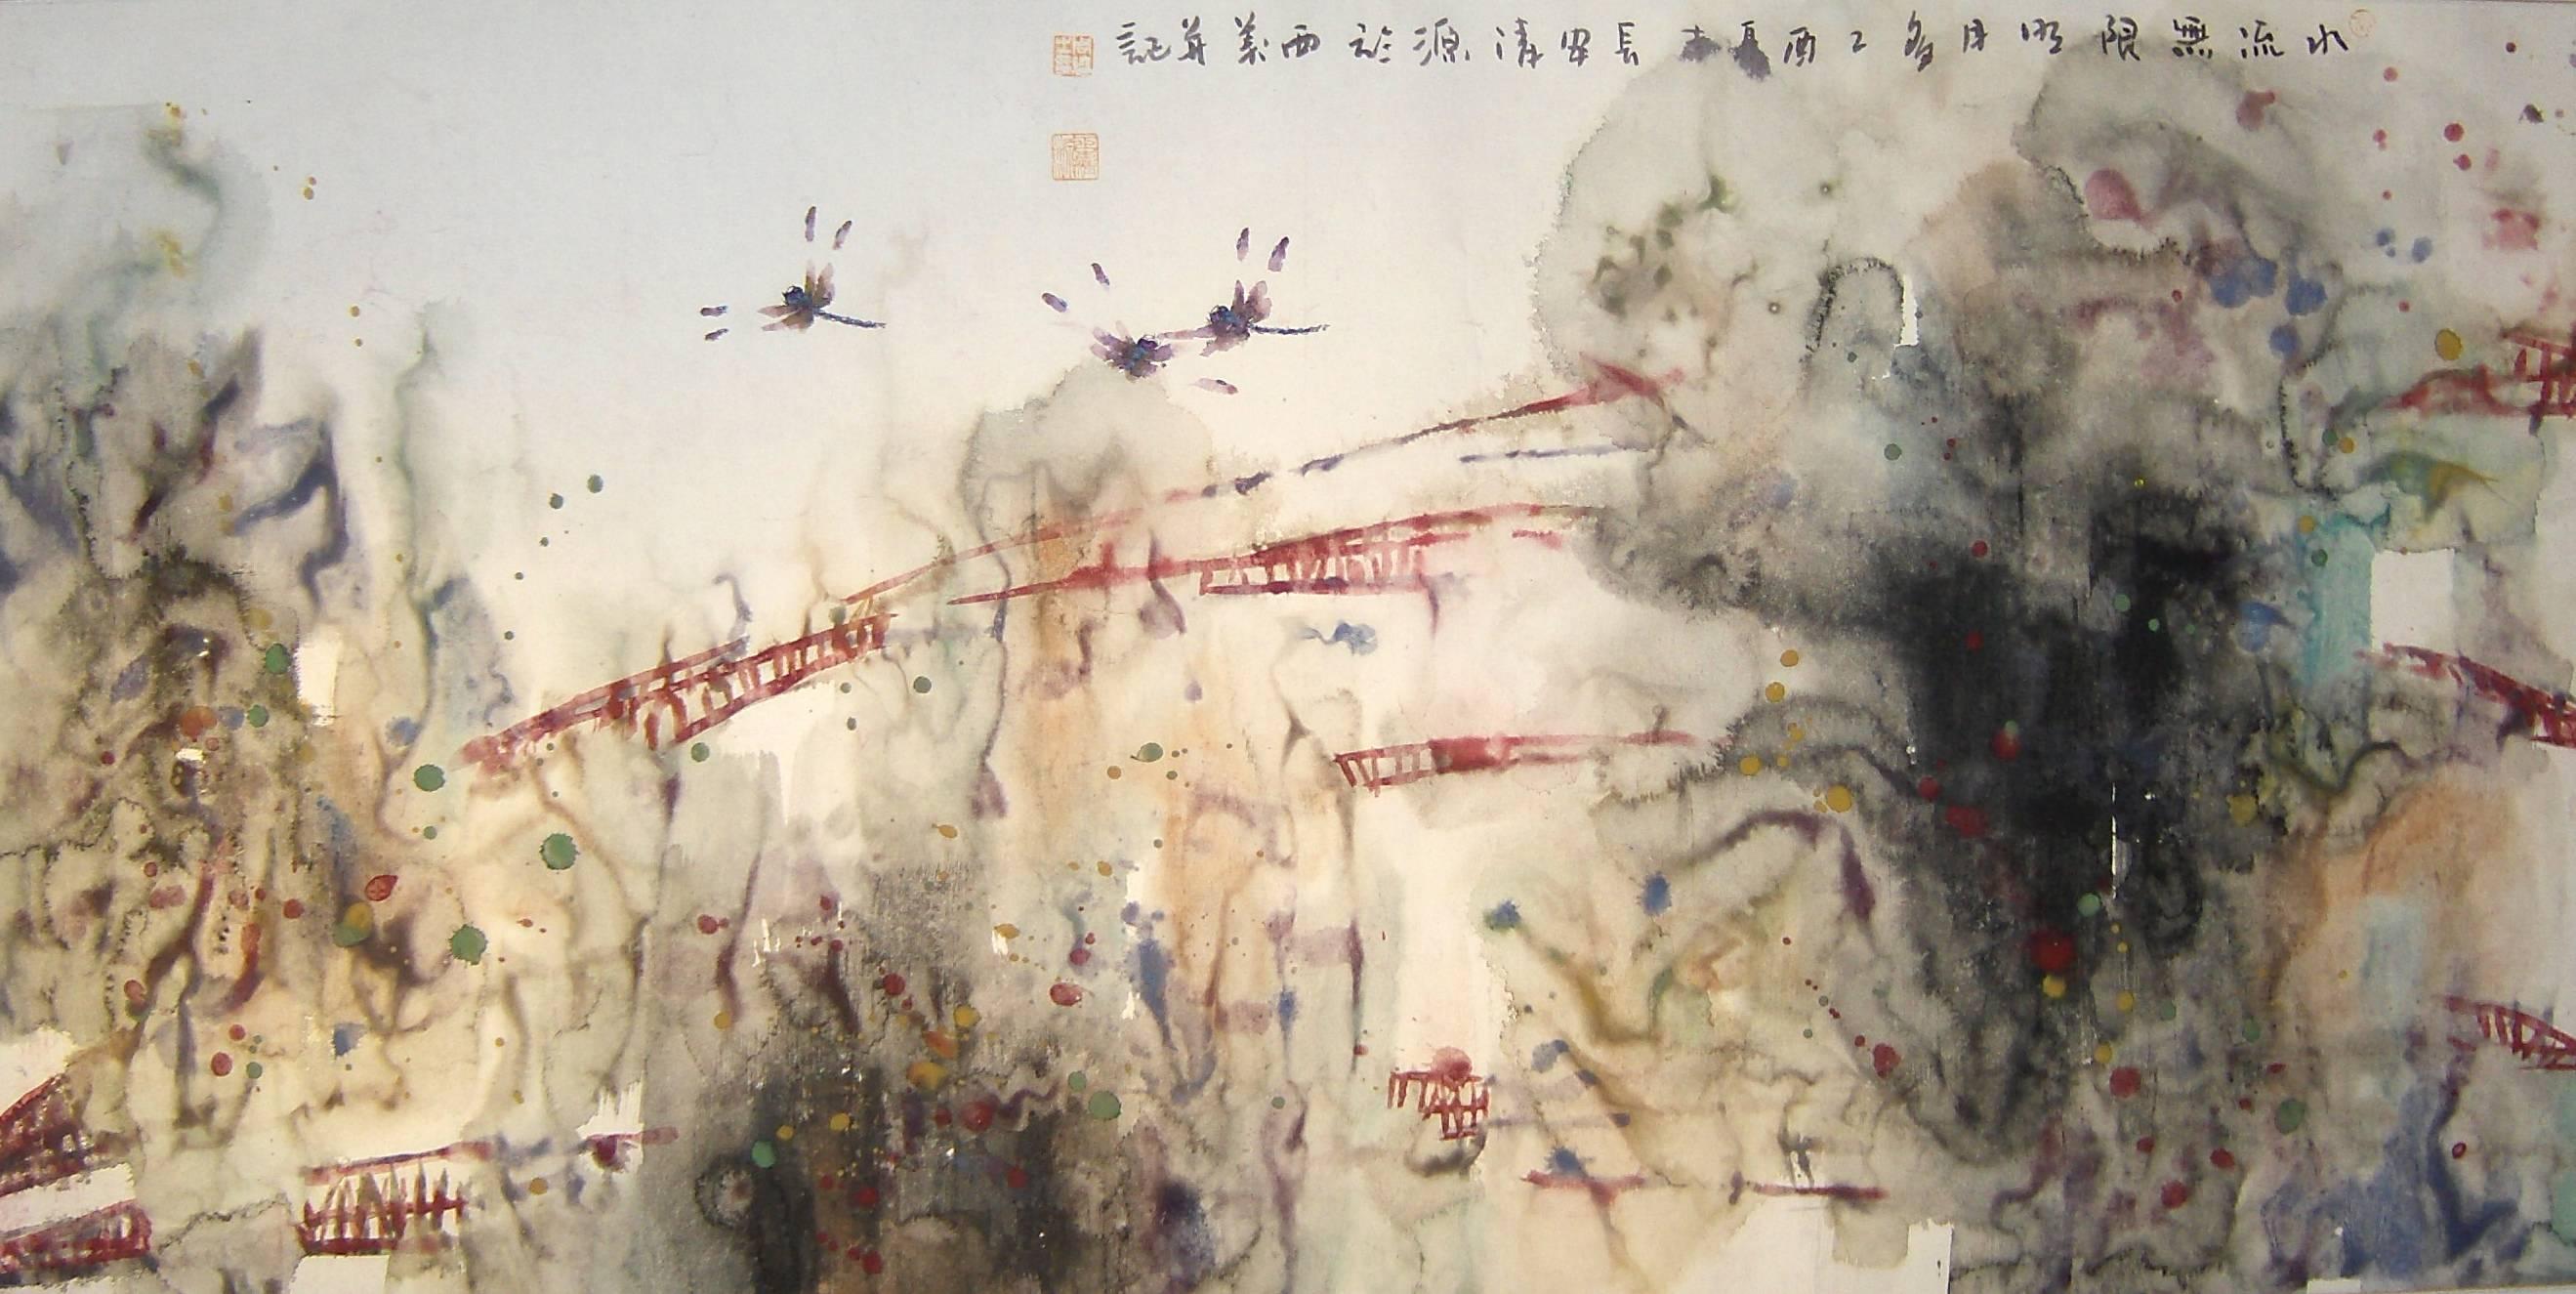 Zhou Xiao Abstract Drawing - "Dragonfly Series #8" Chinese abstract ink on paper in black, white and red